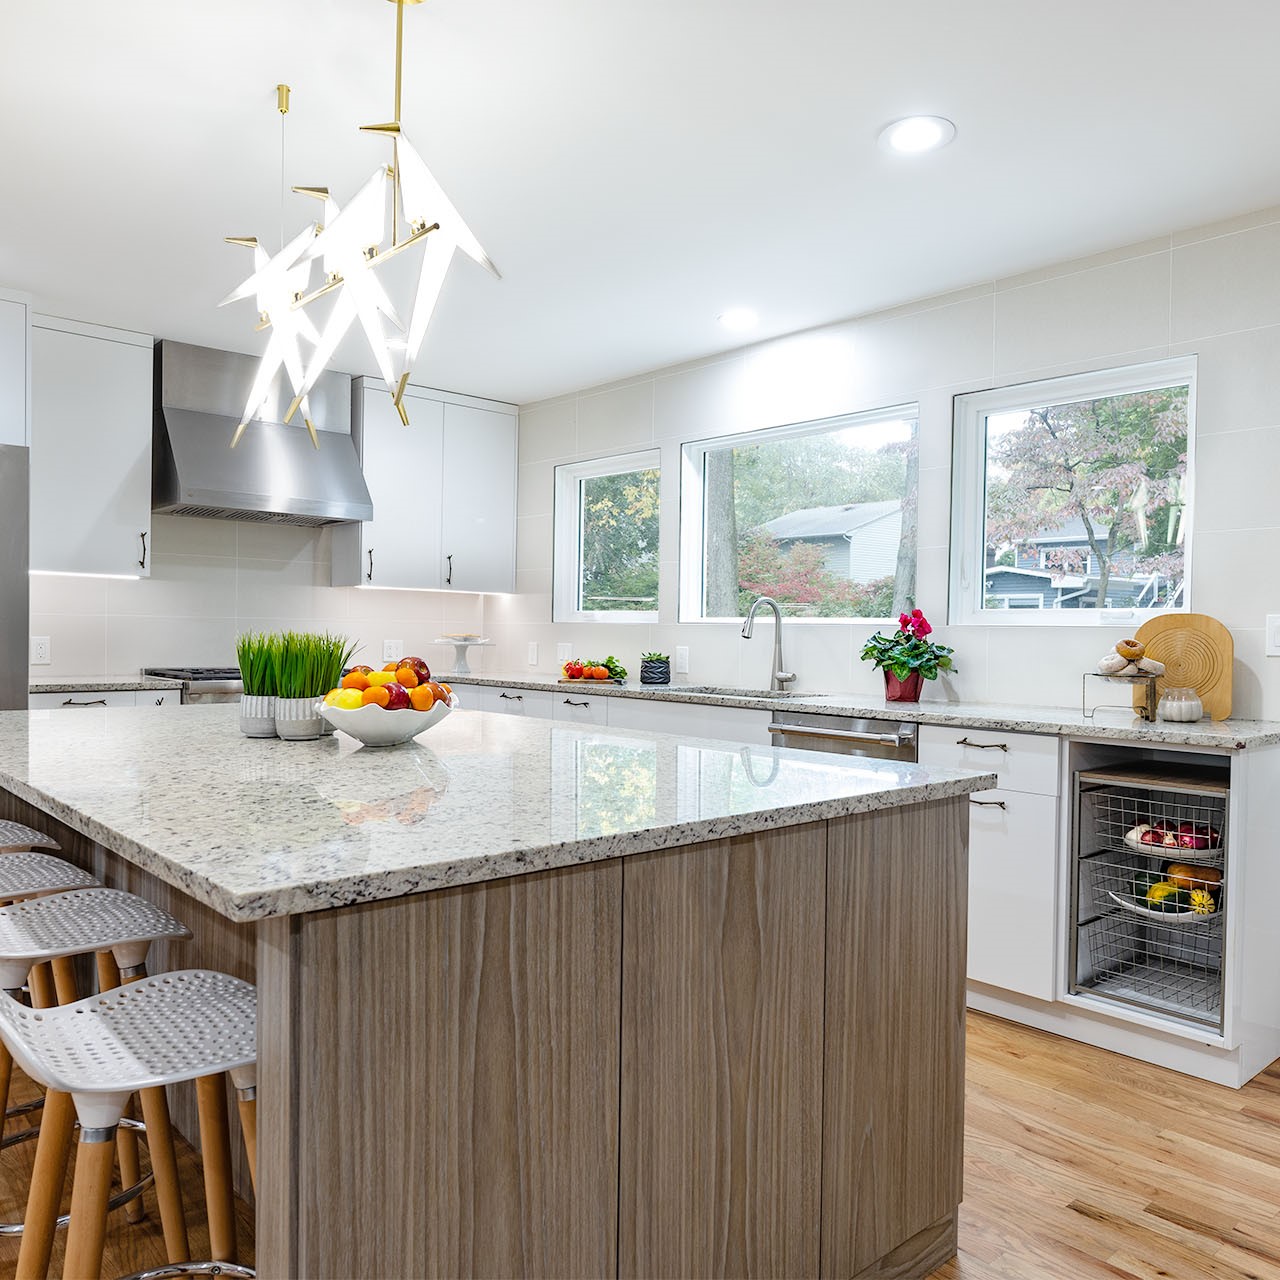 A Livingston Kitchen Remodel with Large Island and Bird Chandelier